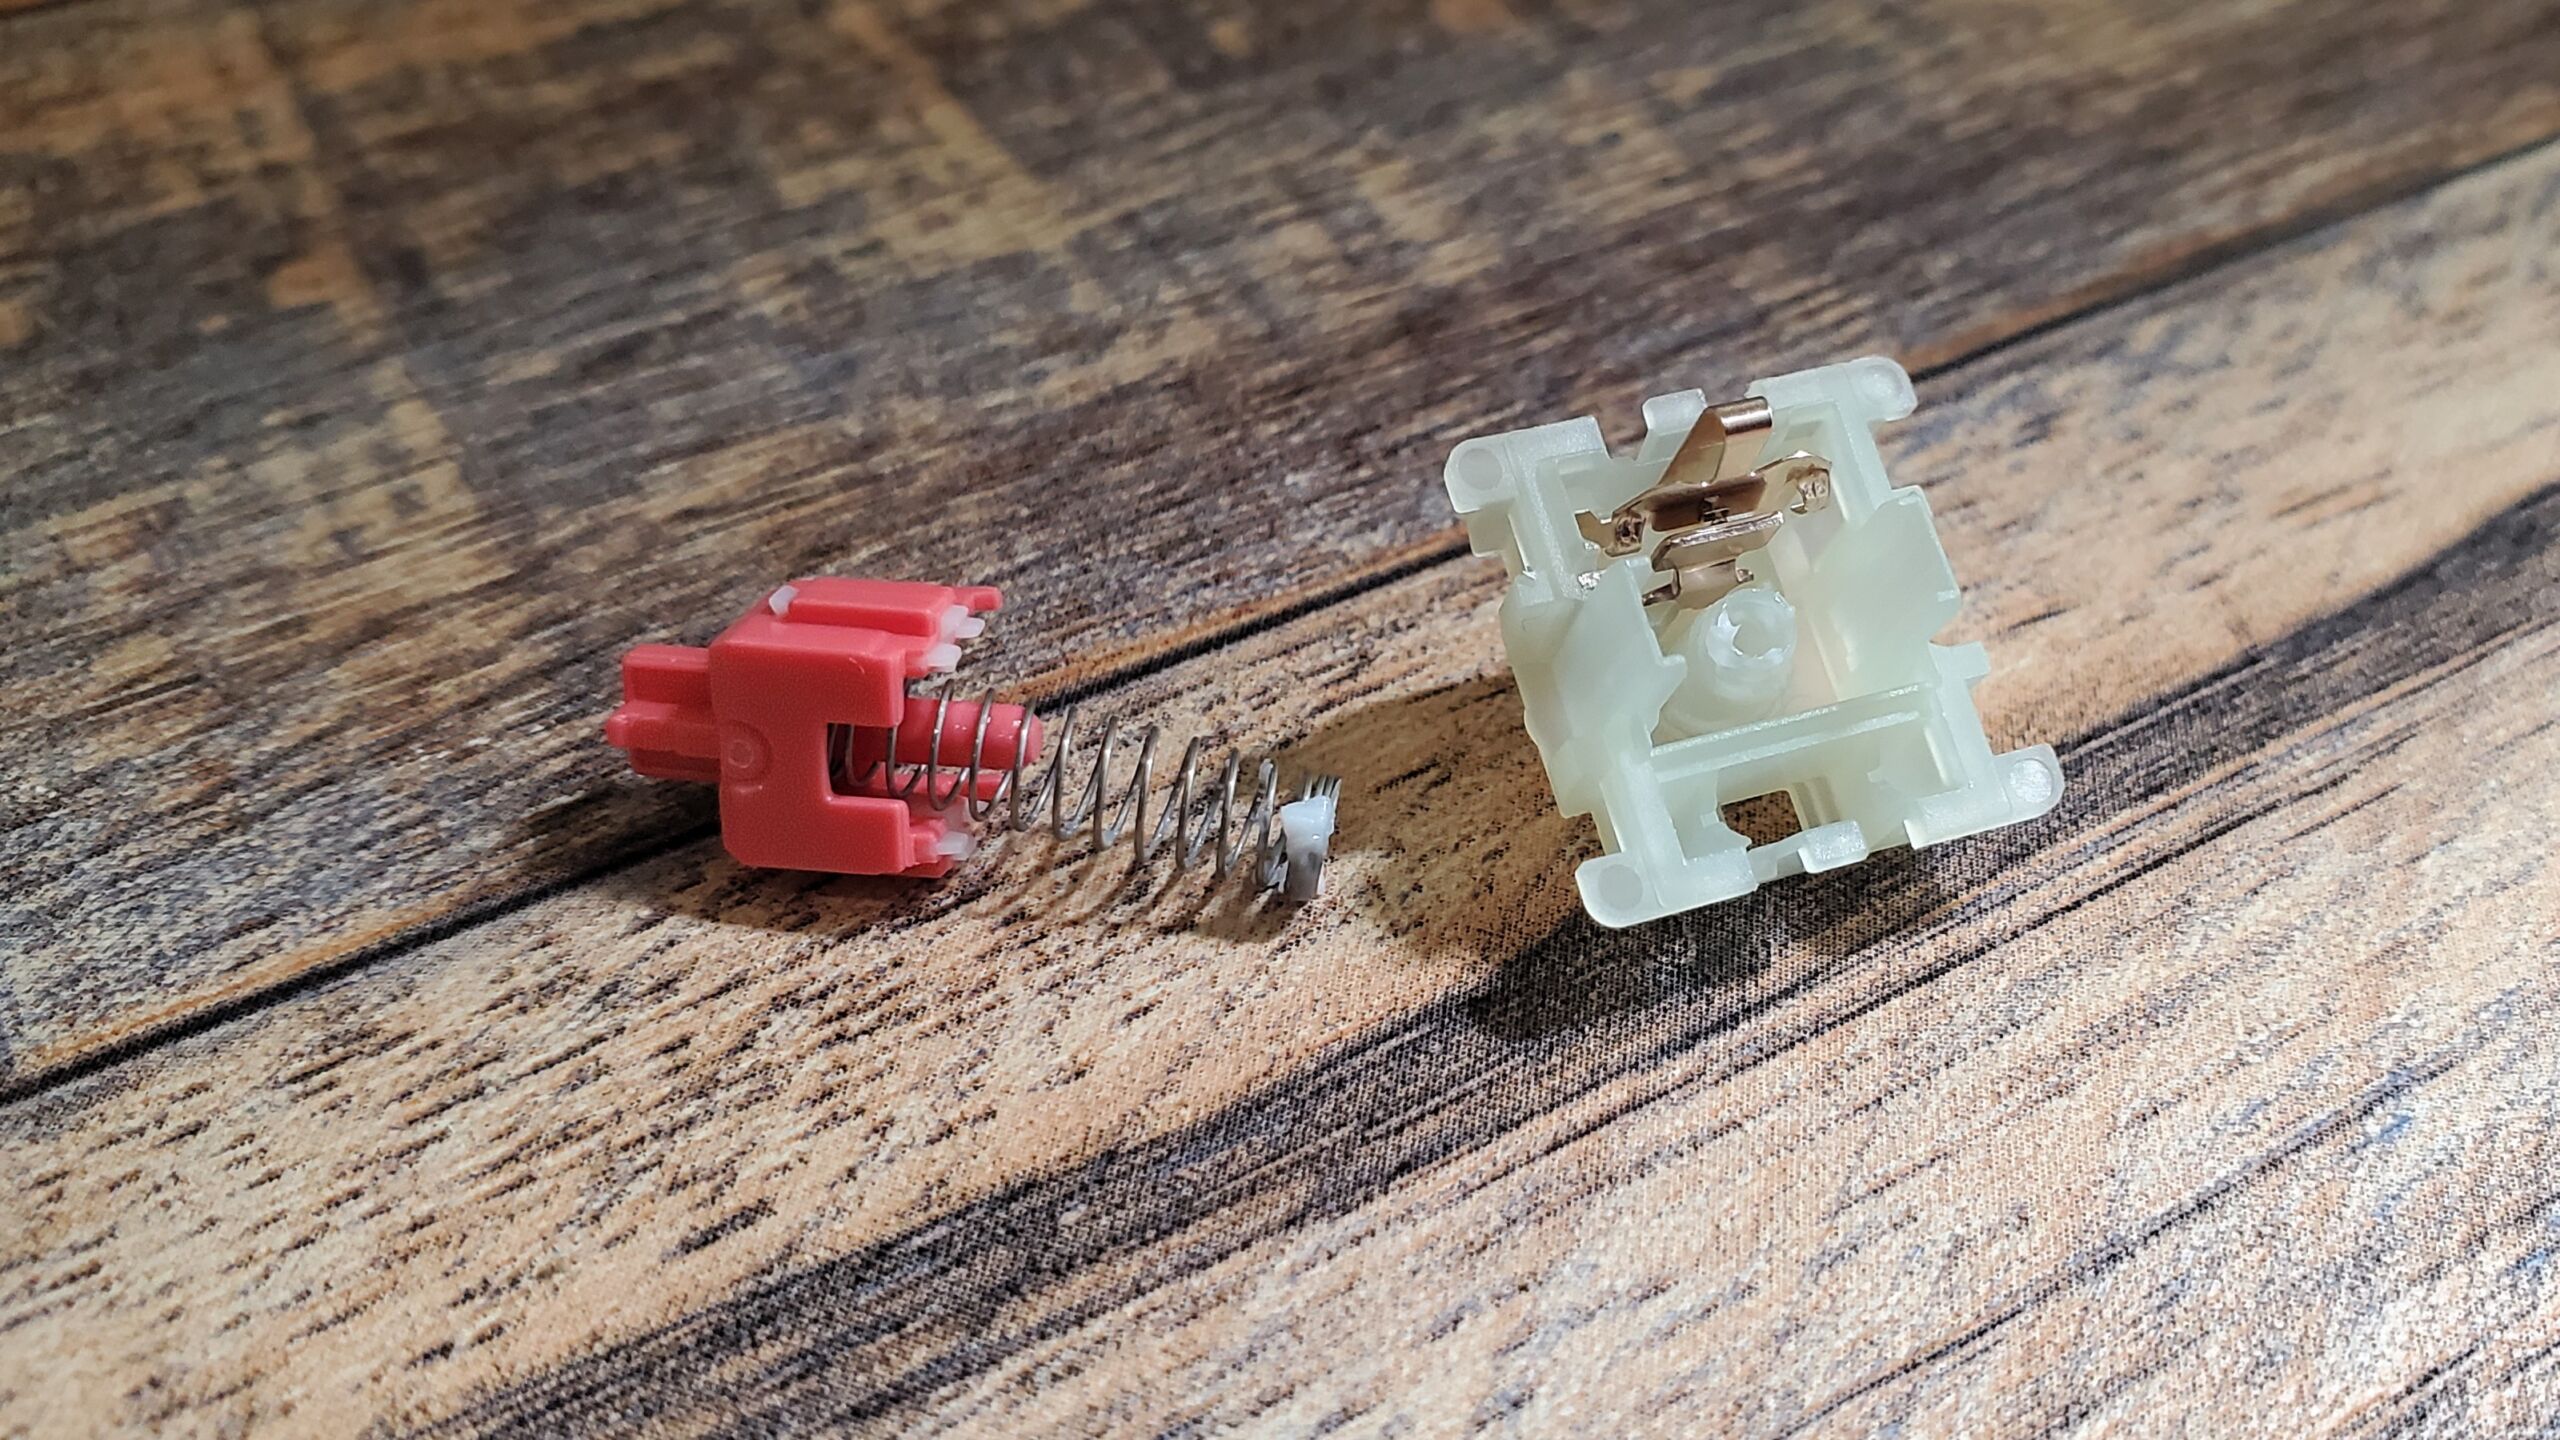 Hands-on with Cherry MX2A switches: A lot less wobble, a little